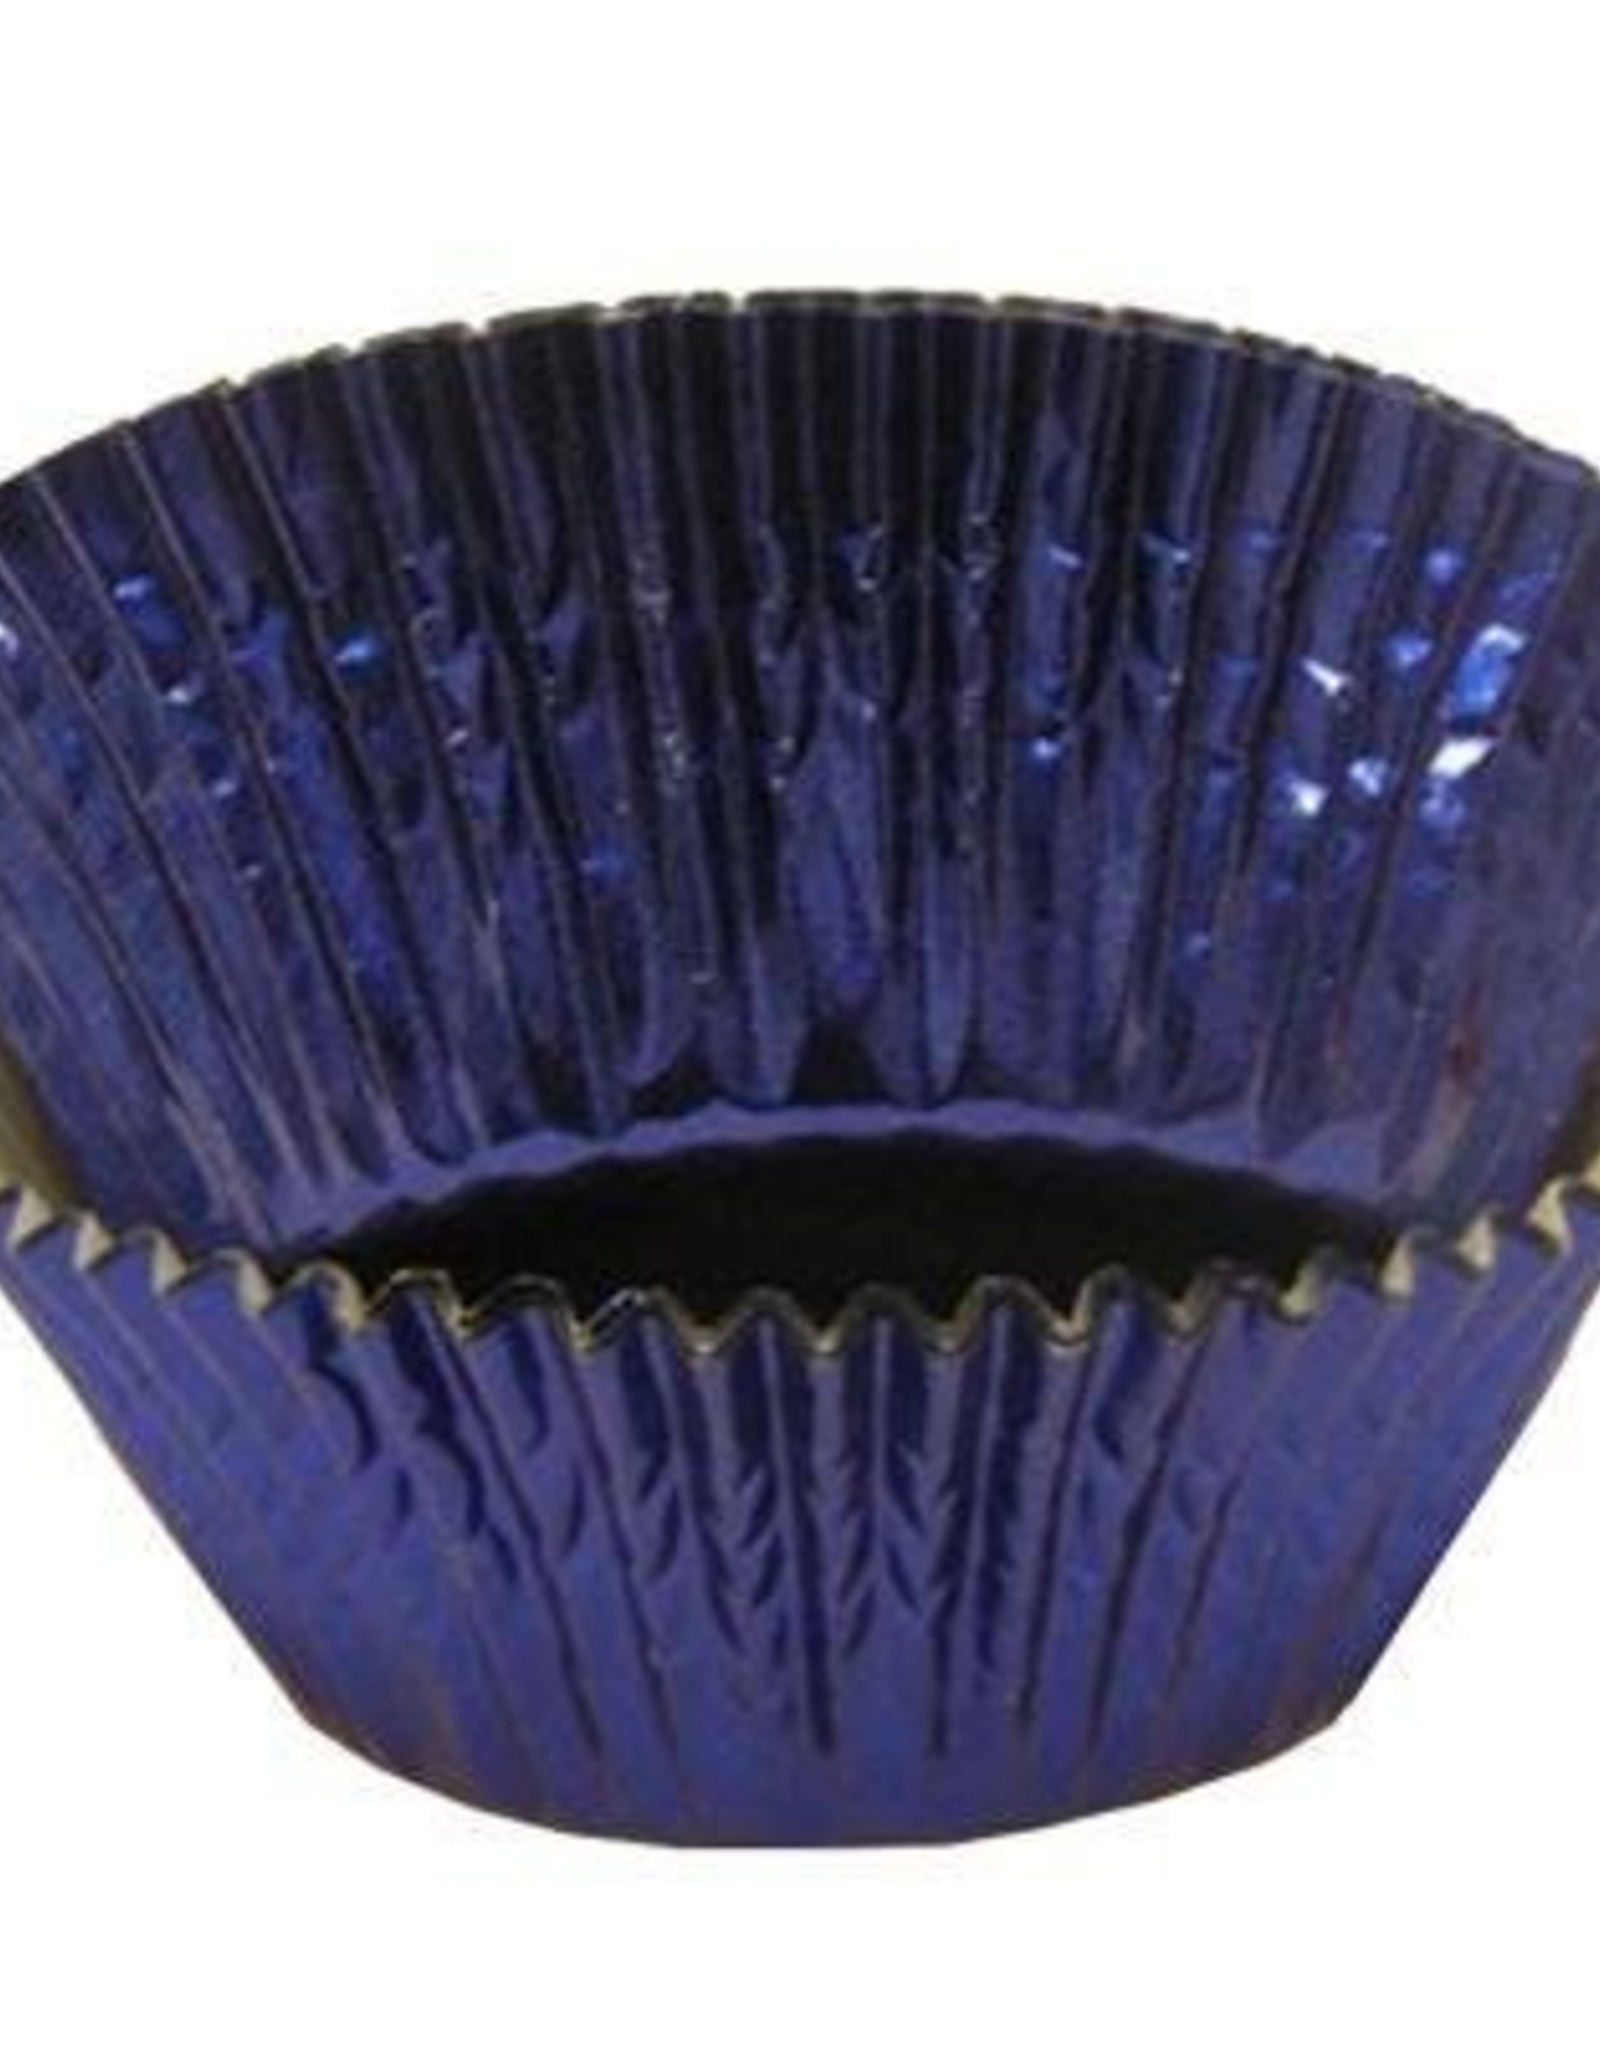 Blue Foil Baking Cups (approx 30ct) MAX TEMP 325F